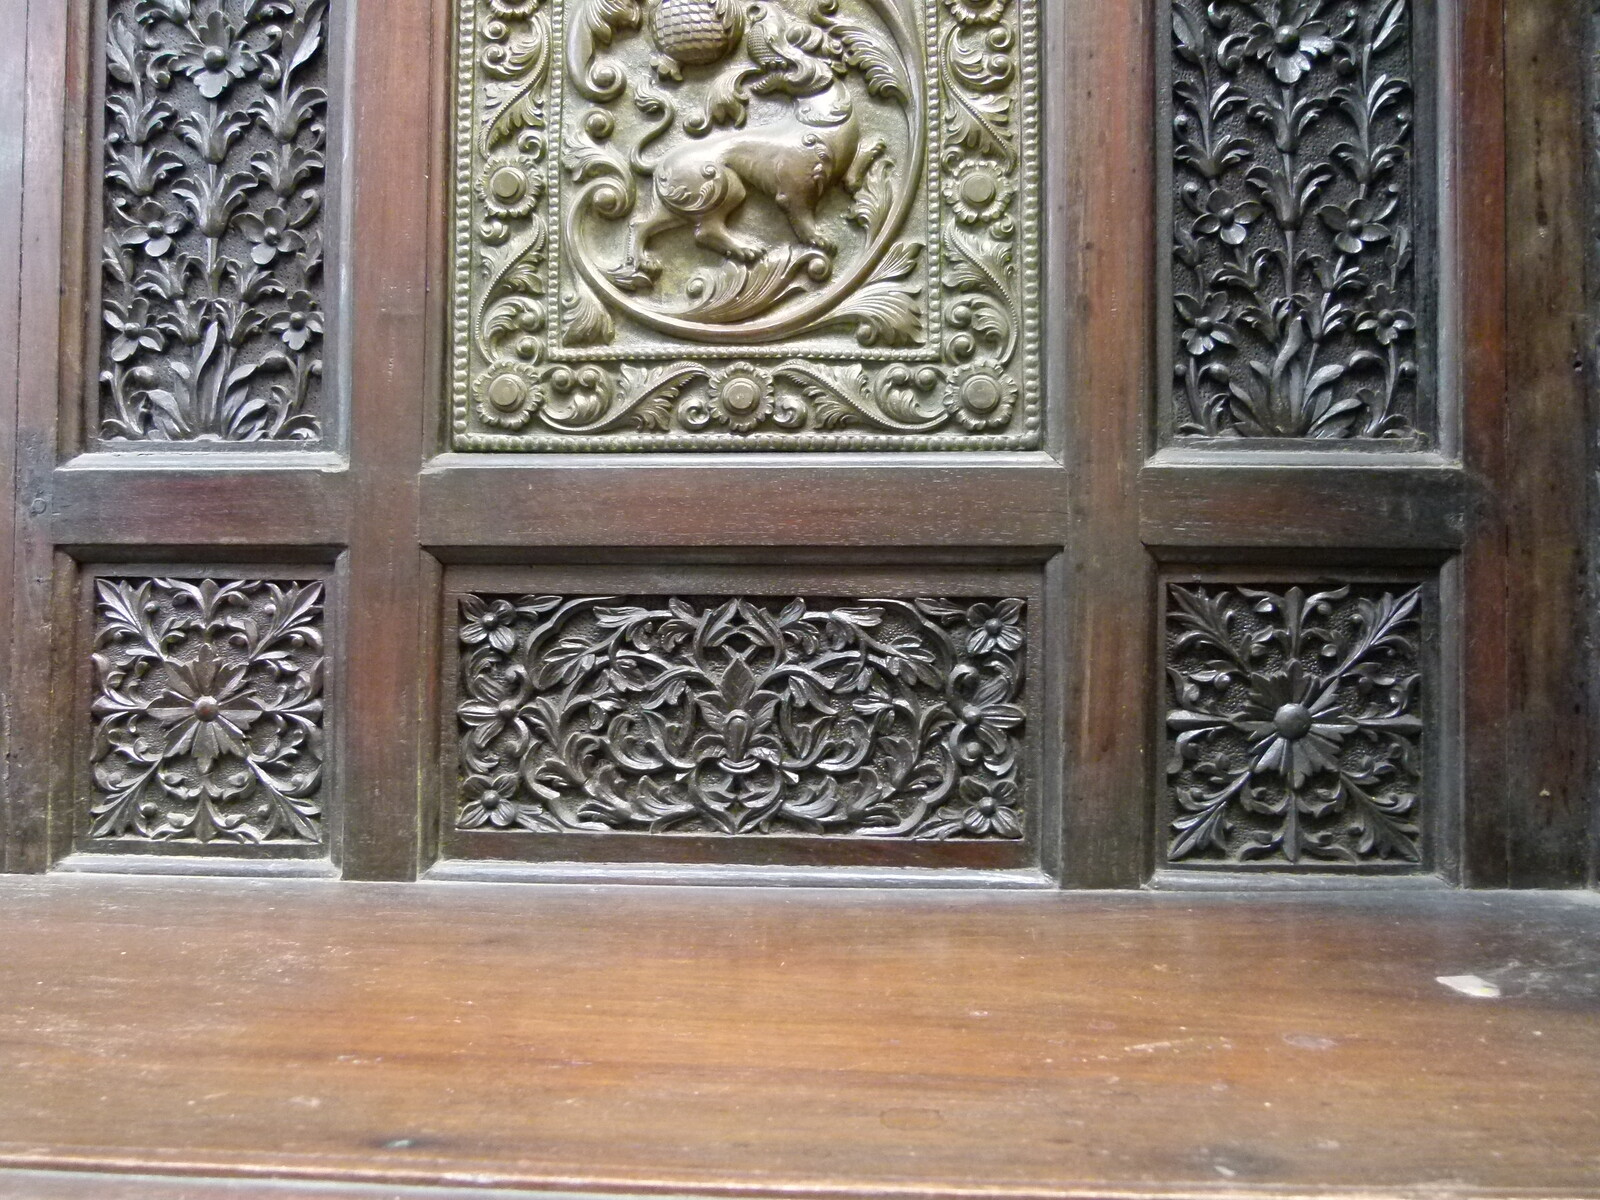 Asiatique Huge cabinet from a temple